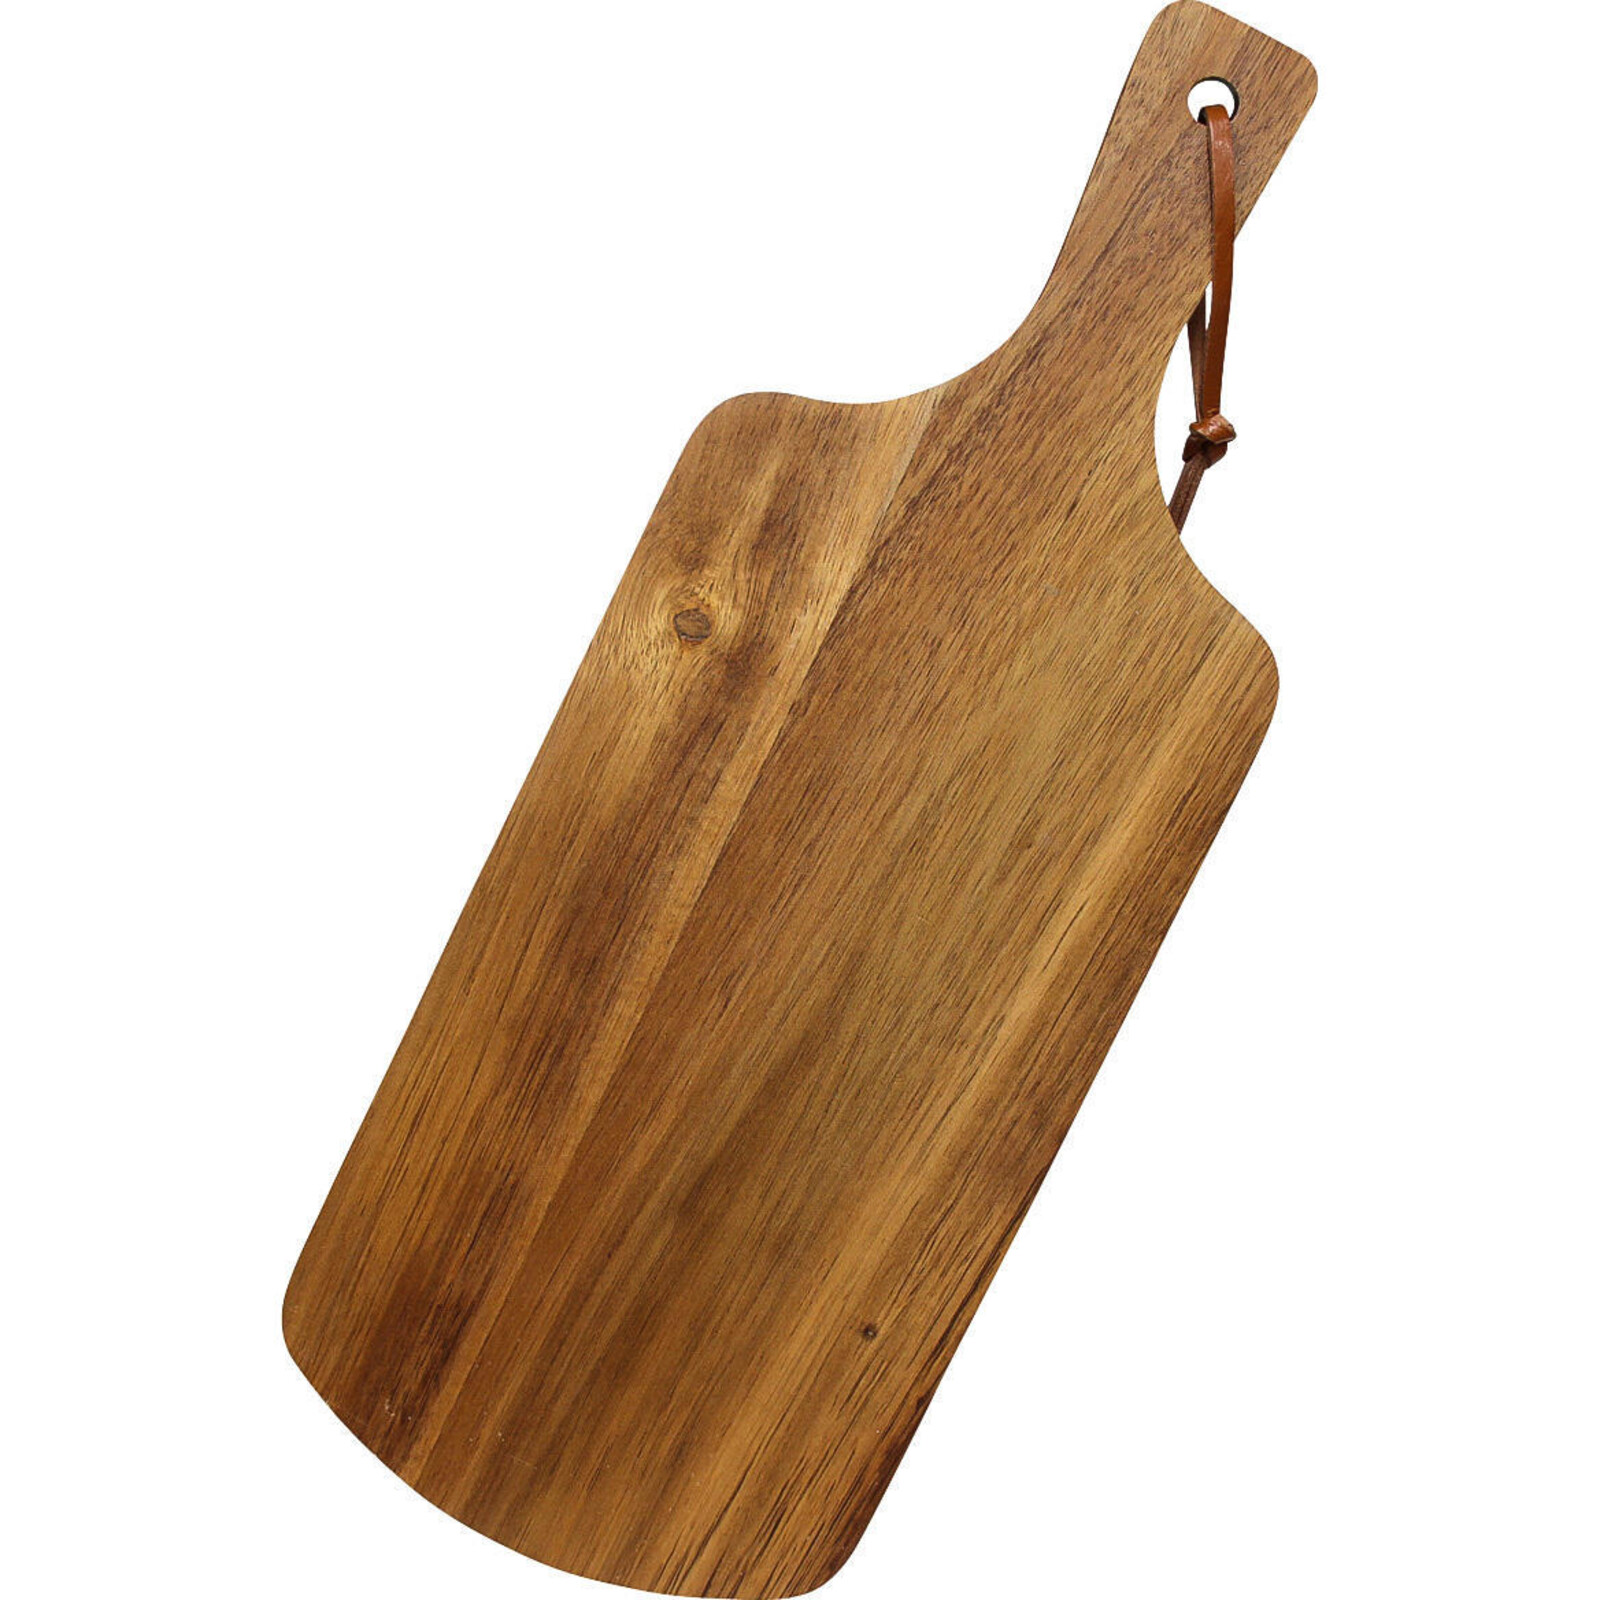 Serving Board Rectangle